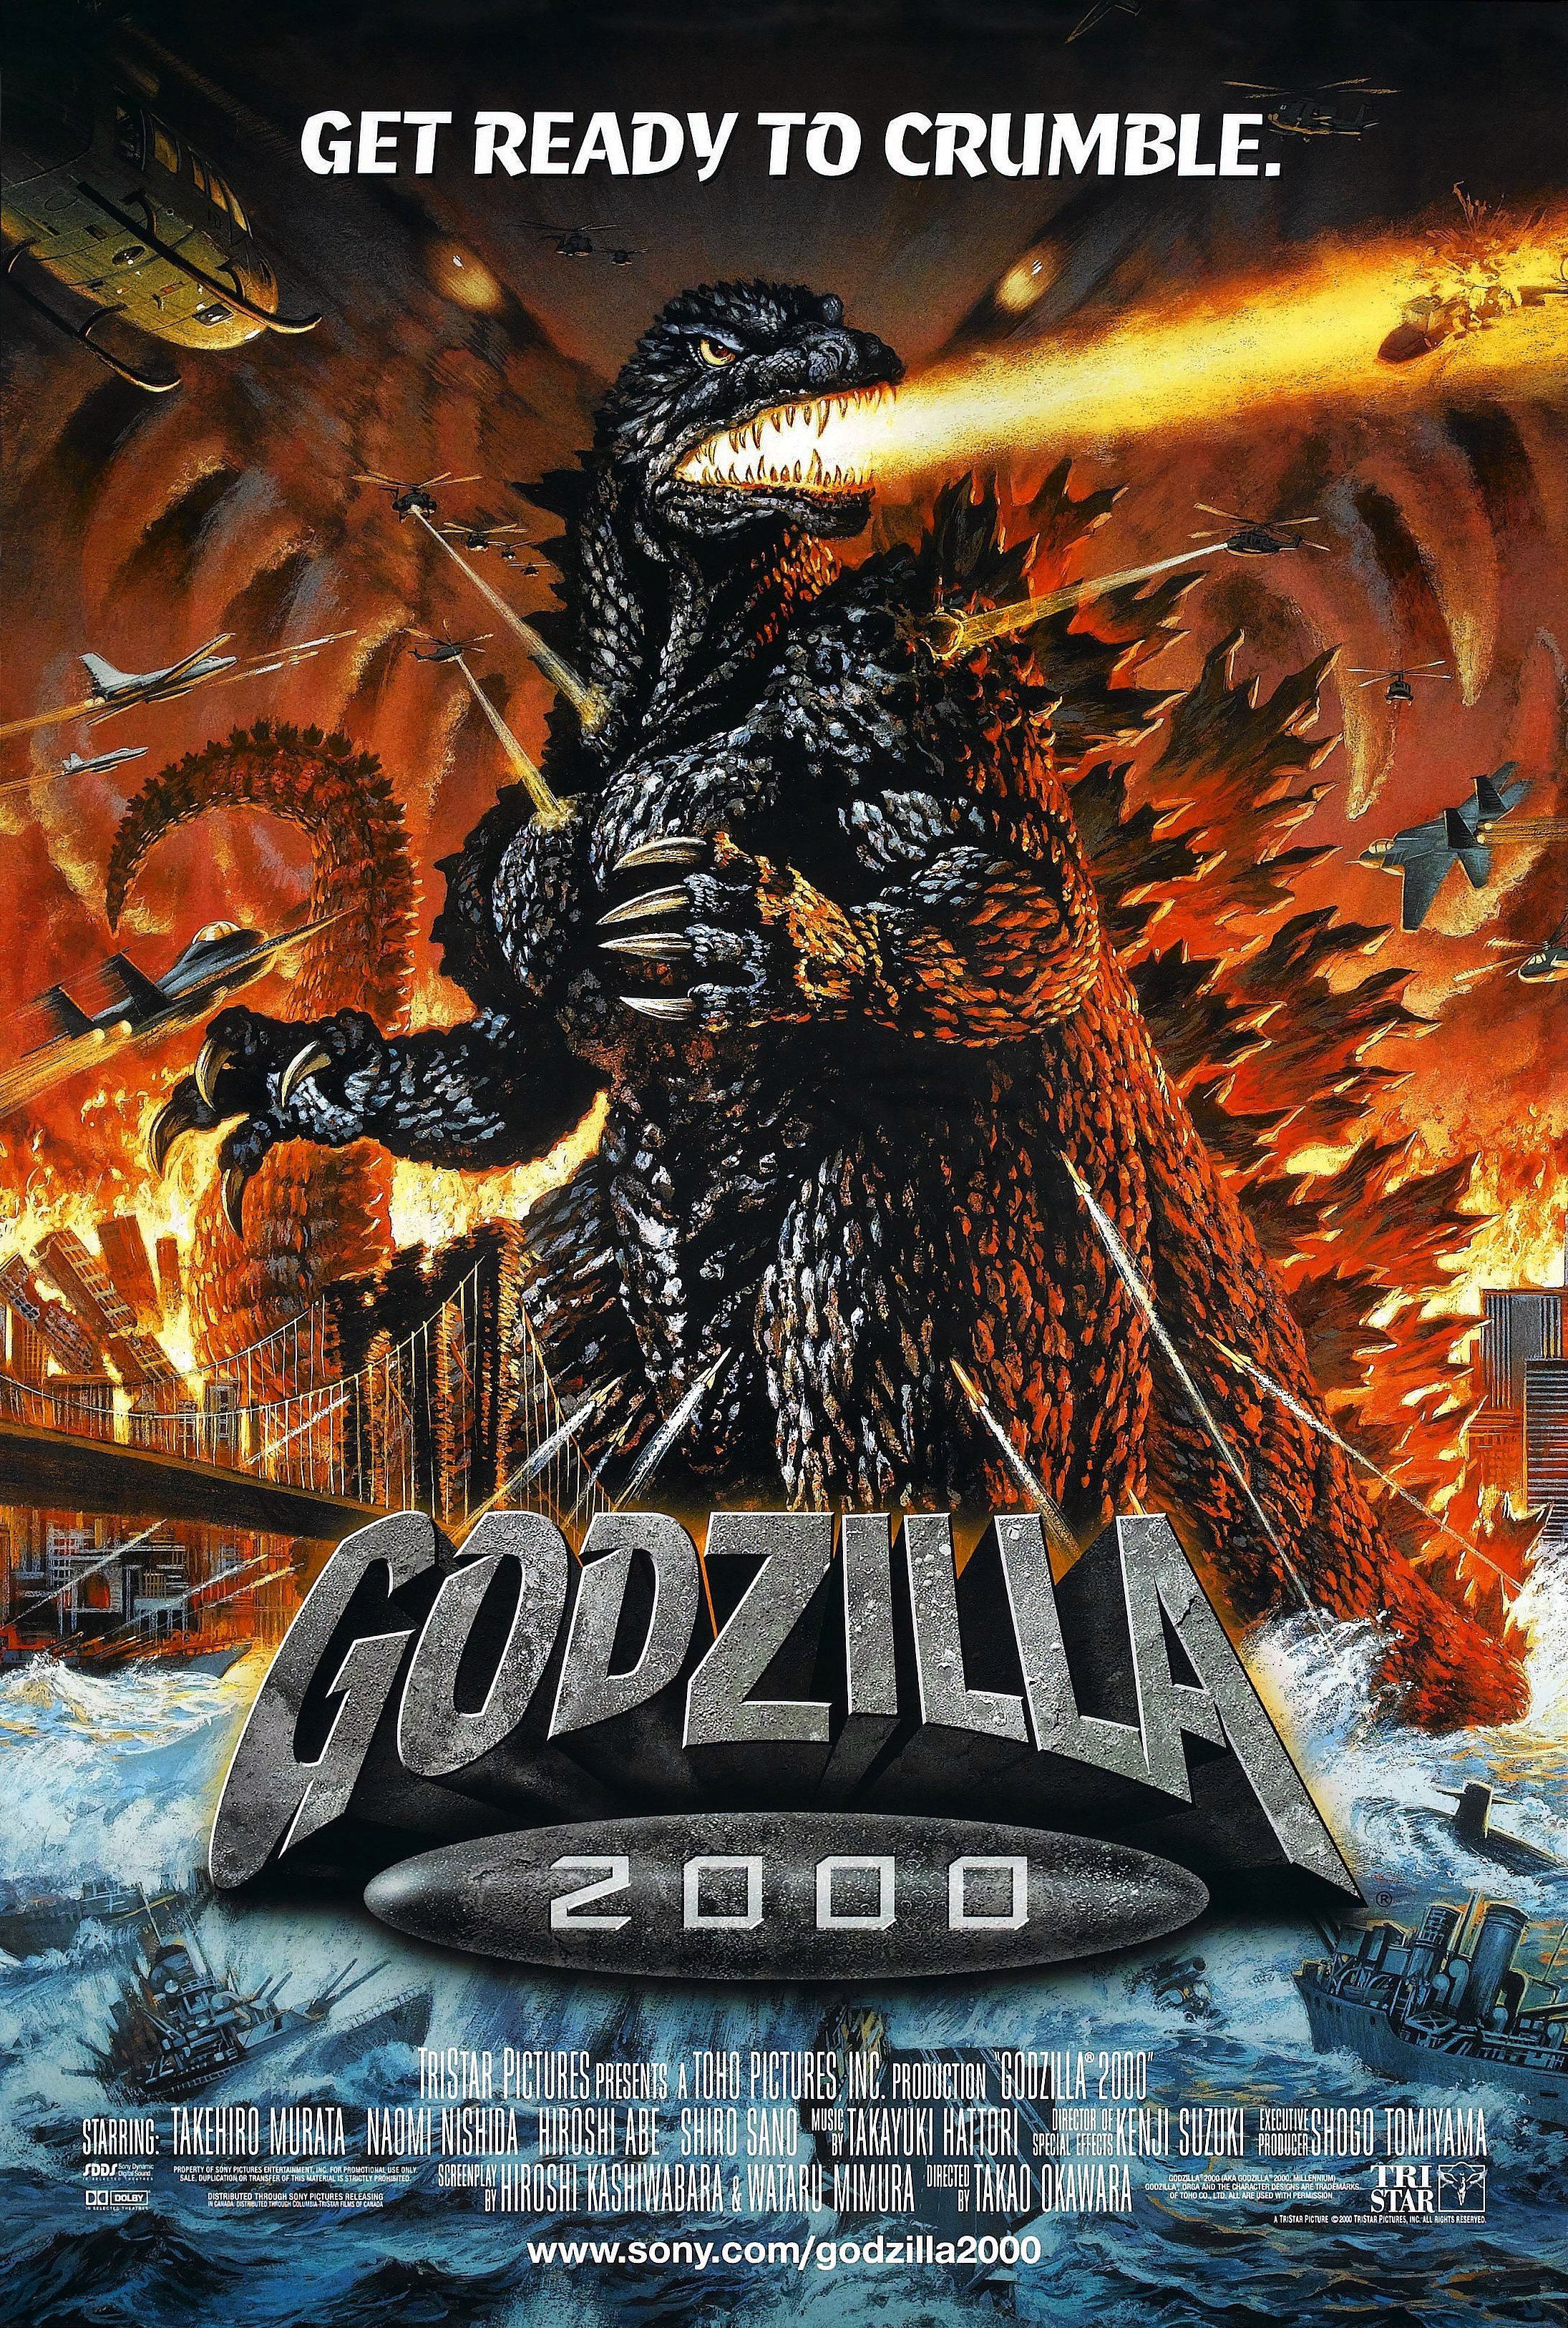  hd wallpapers to choose Images art godzilla   cachedjun cachedmay